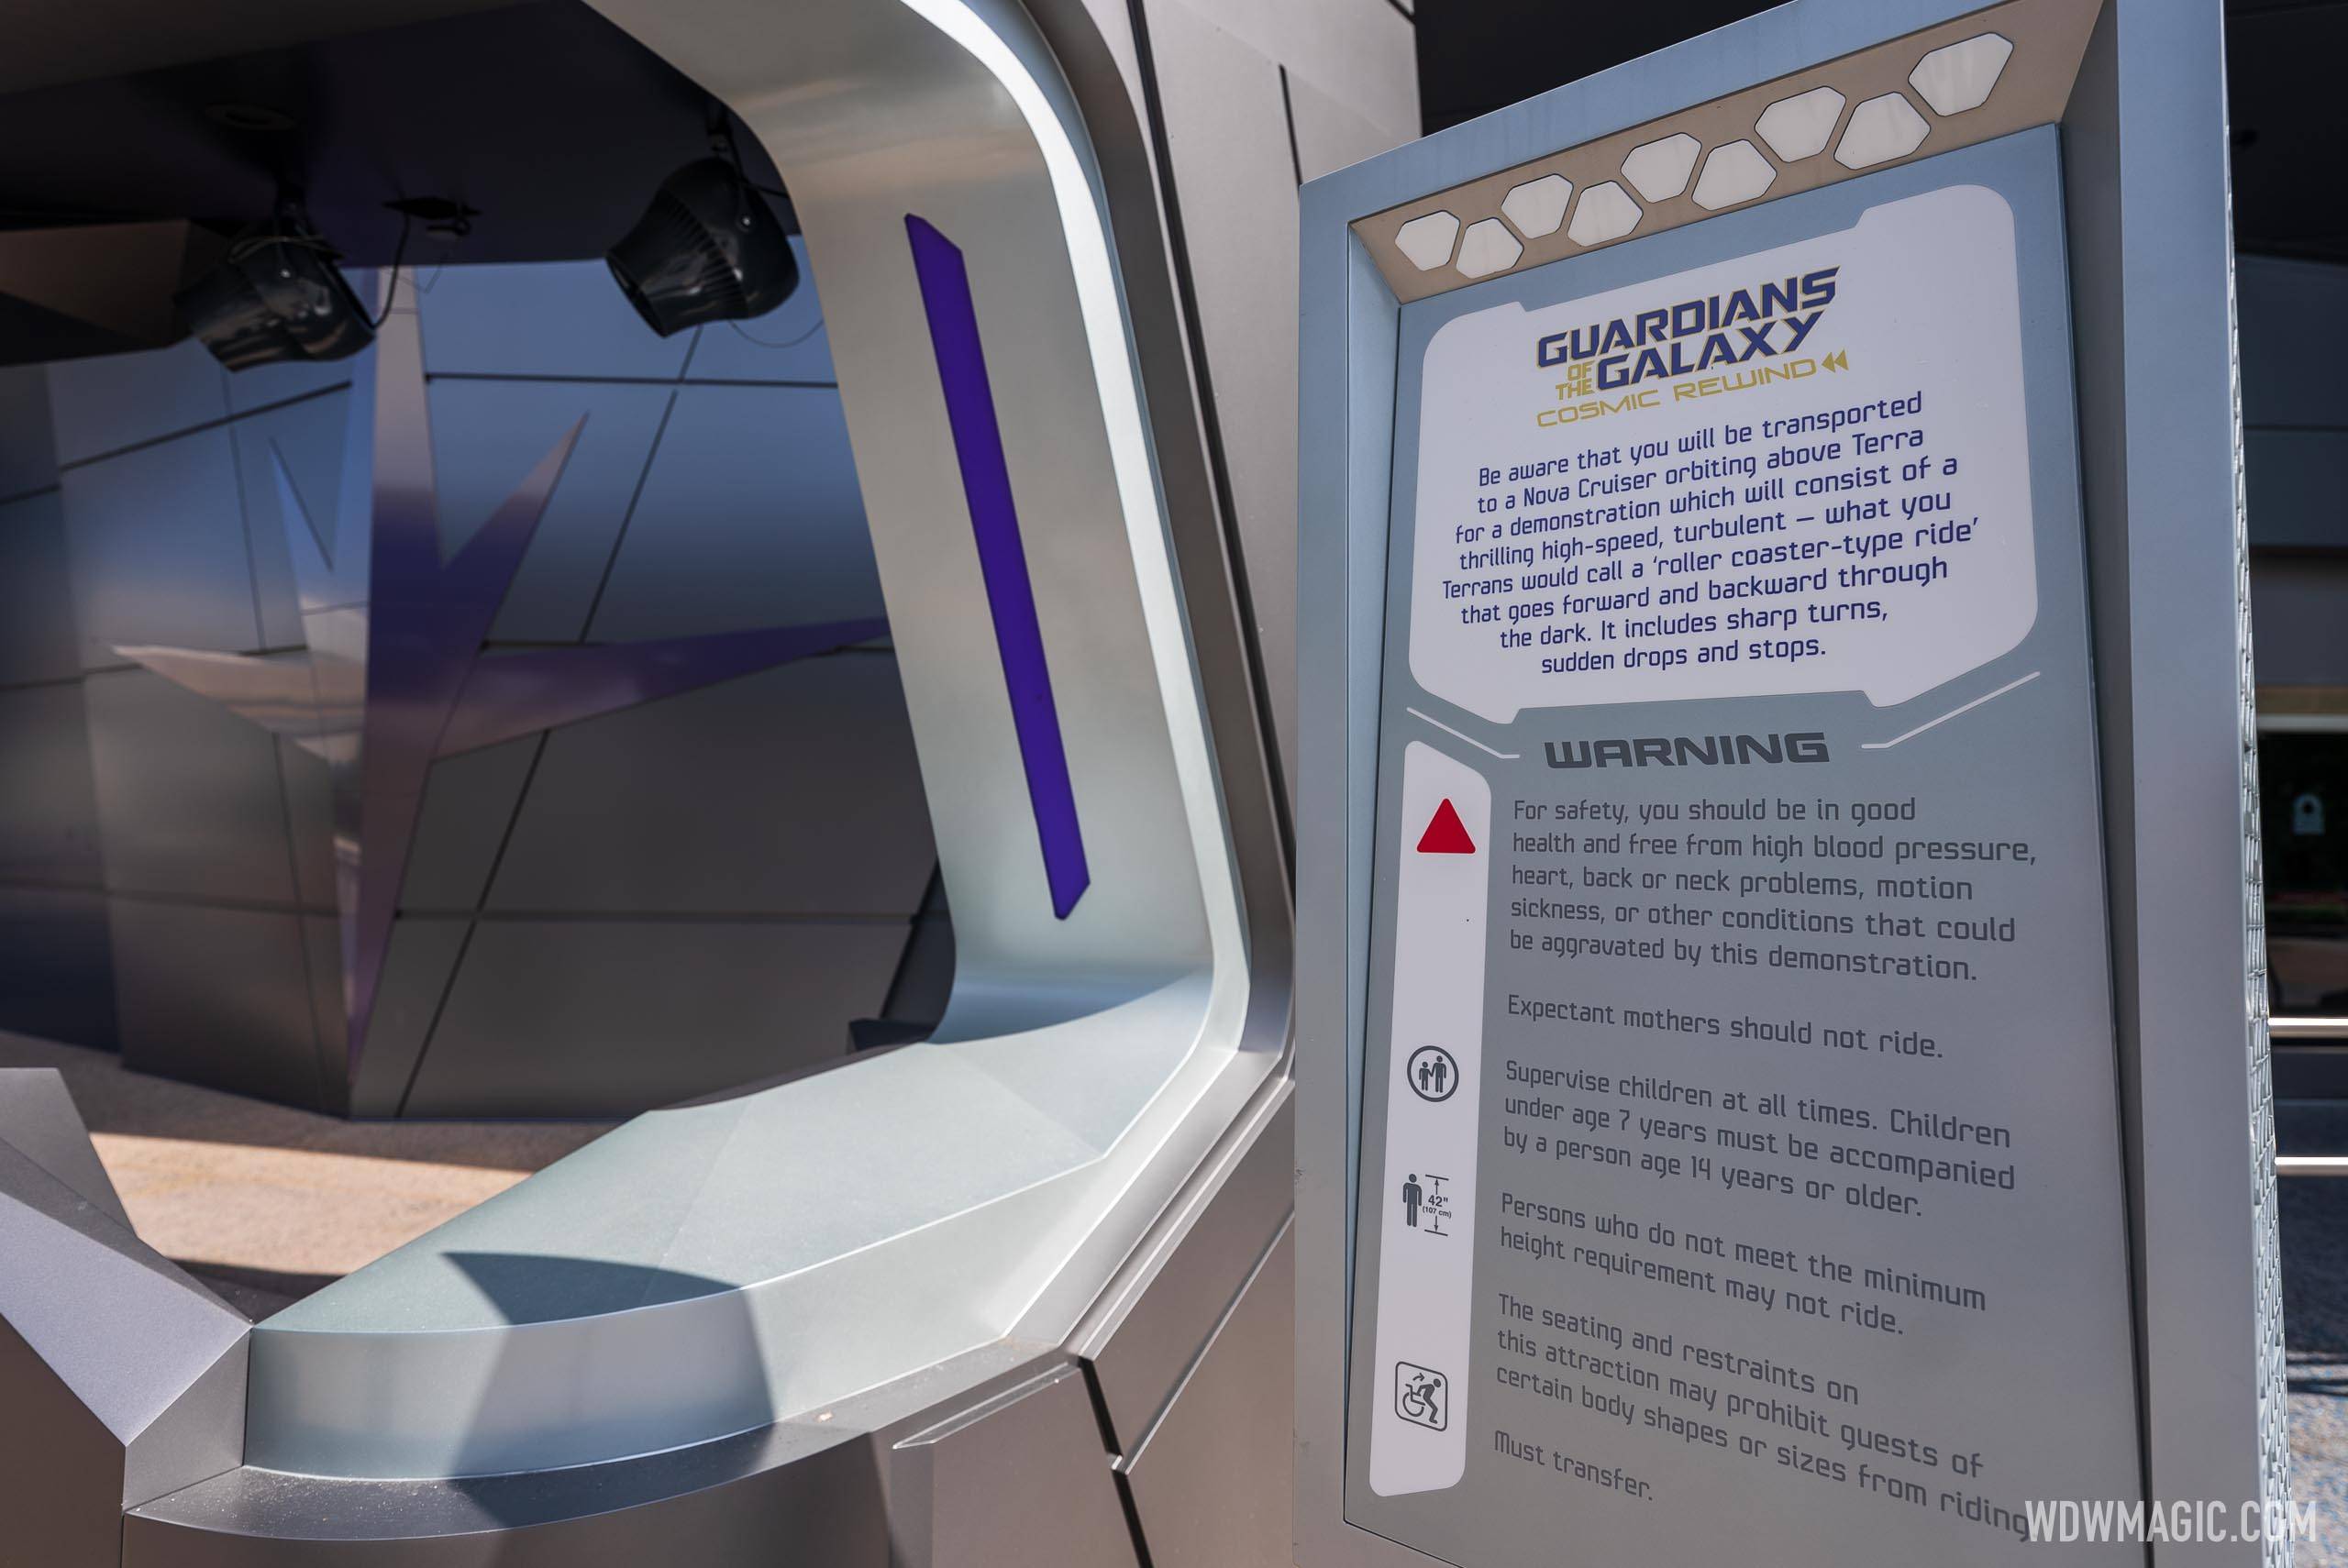 Guardians of the Galaxy Cosmic Rewind safety and warning sign at the entrance